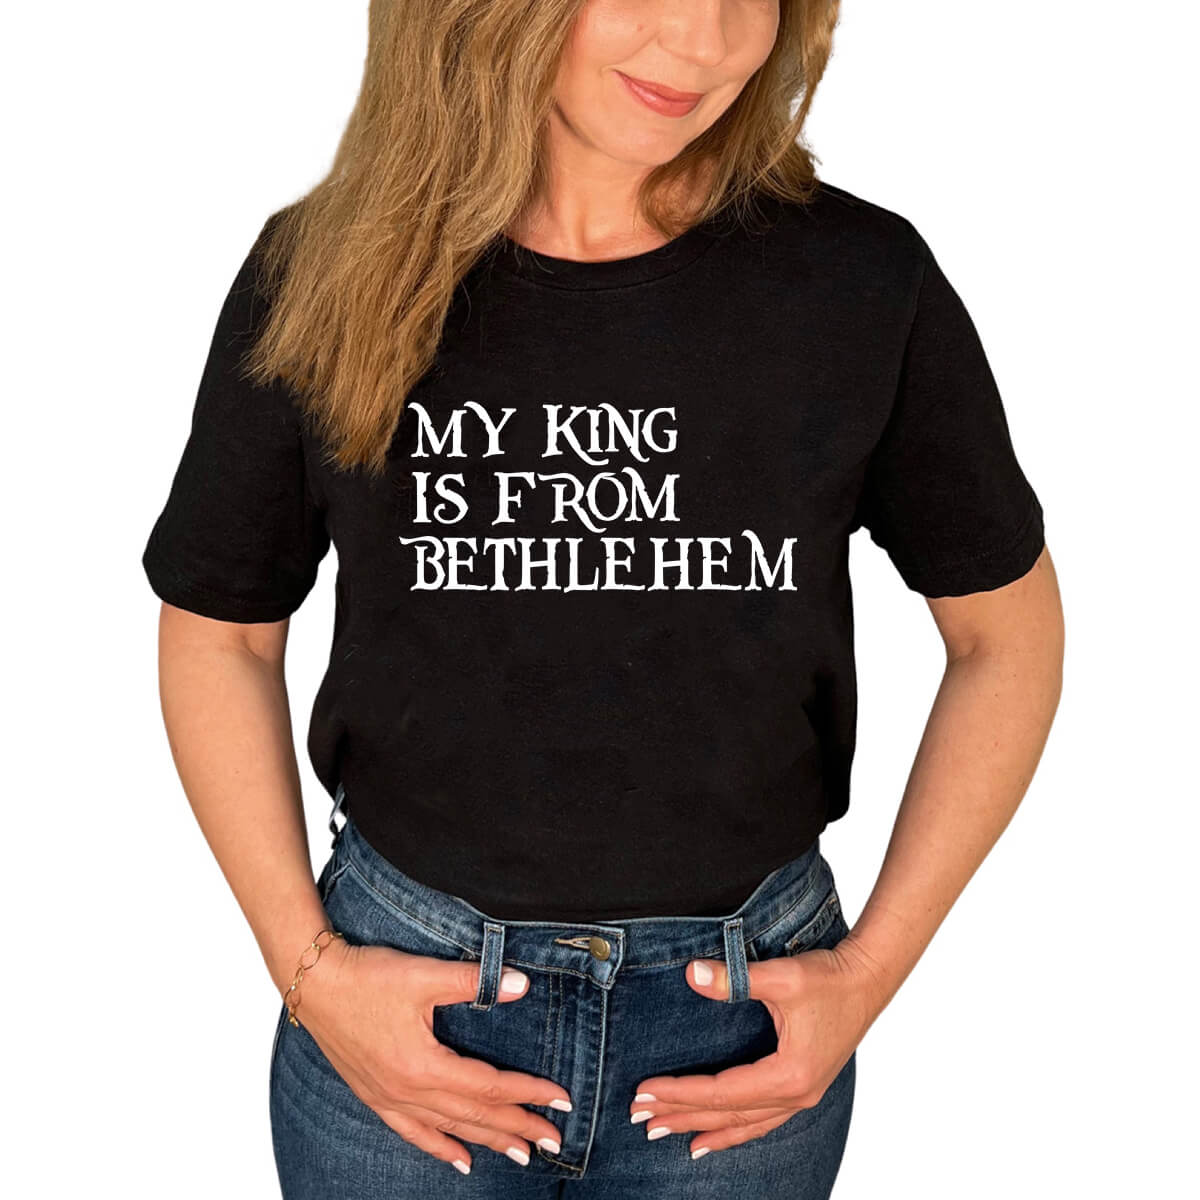 My King Is From Bethlehem T-Shirt